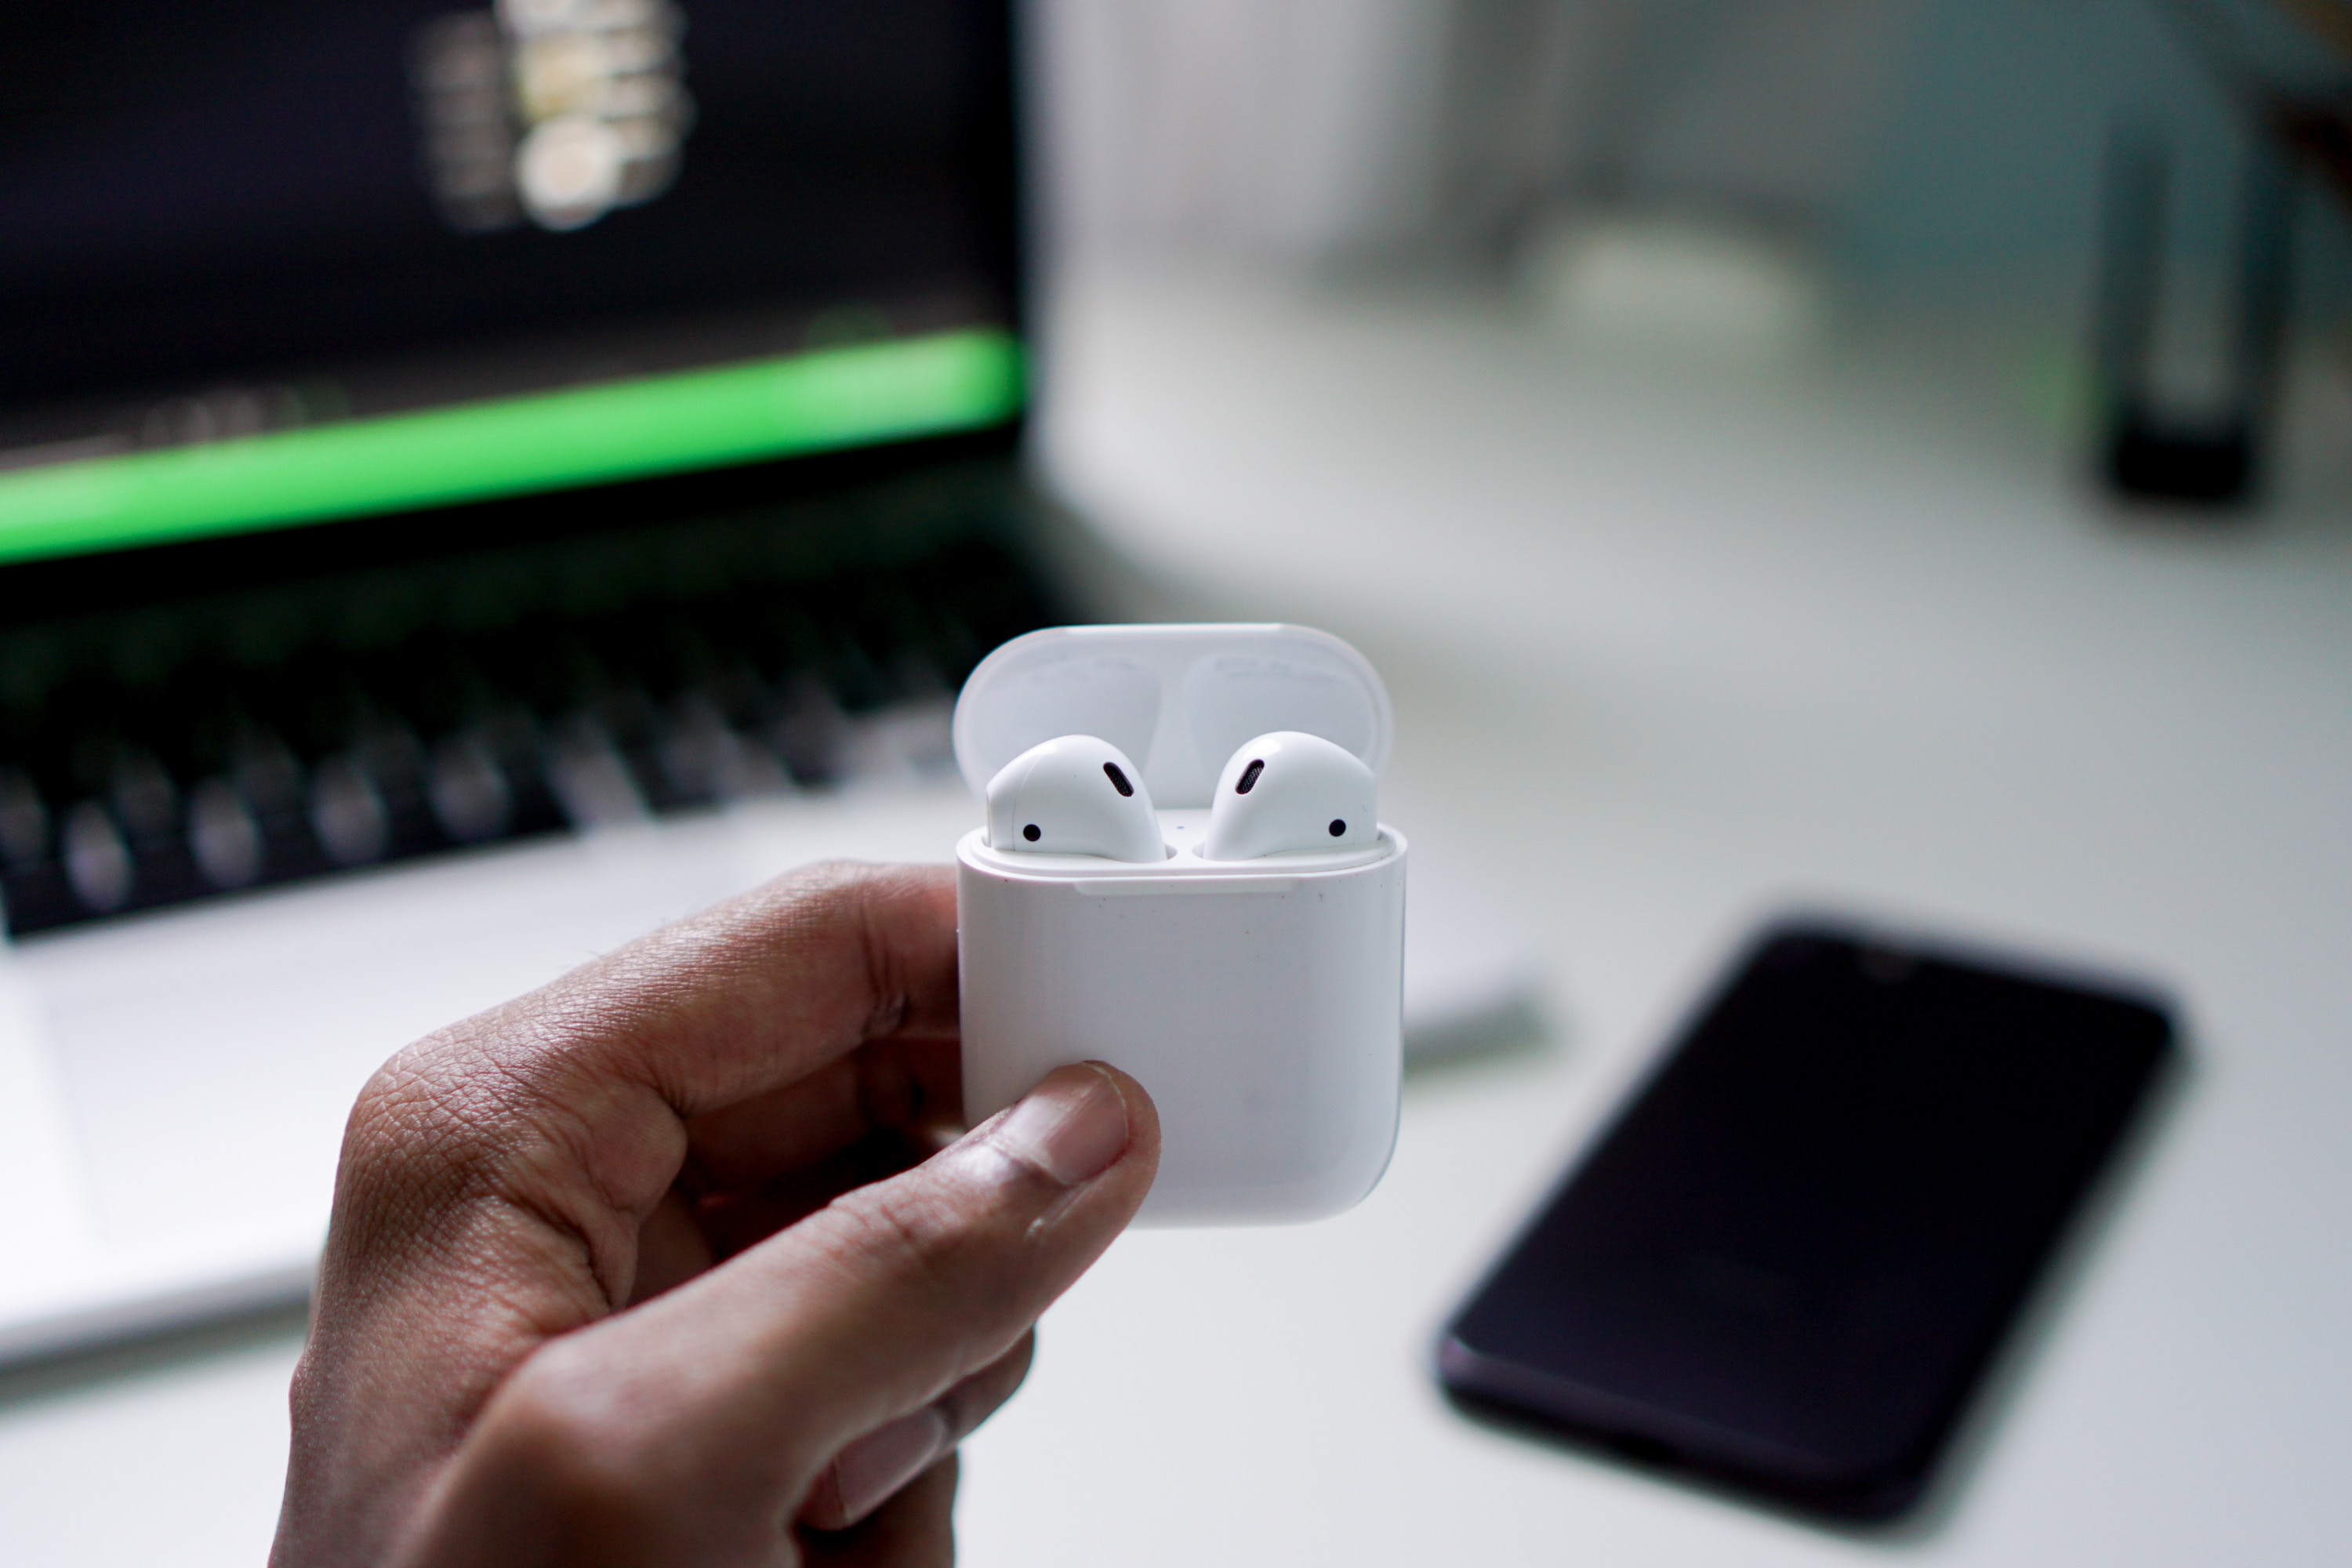 Apple to produce millions of ‘made in Vietnam’ AirPods amid pandemic